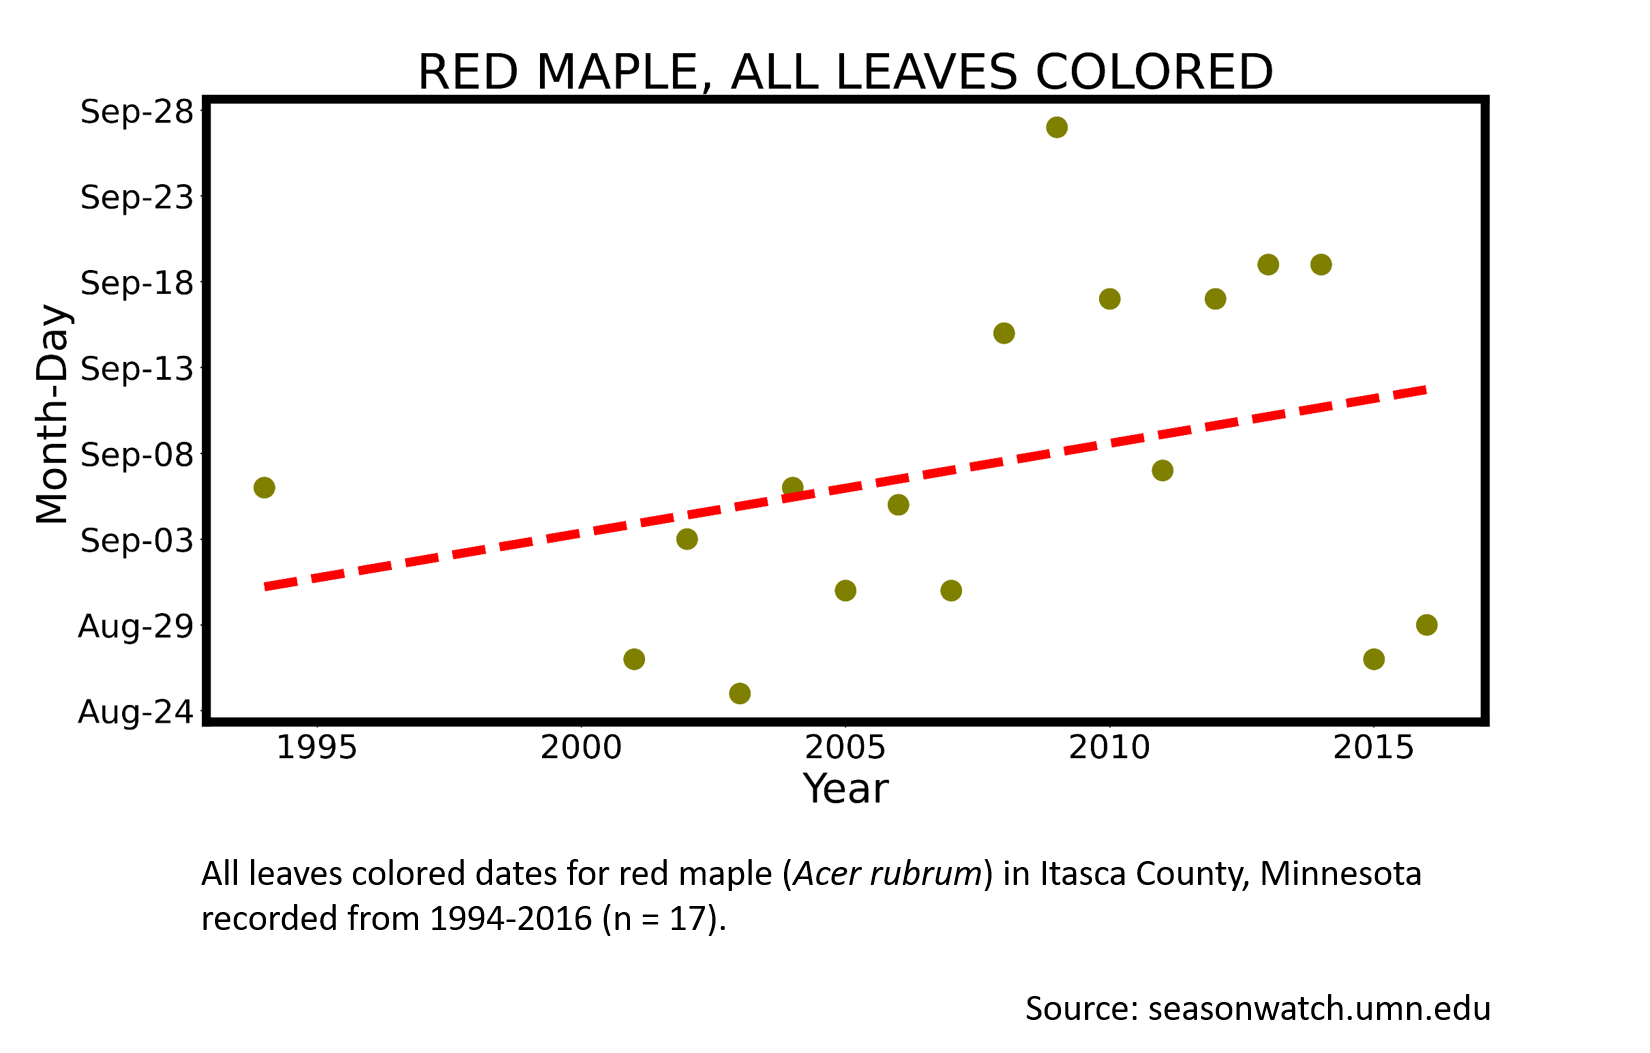 Scatterplot showing red maple phenology observations in Itasca County, Minnesota